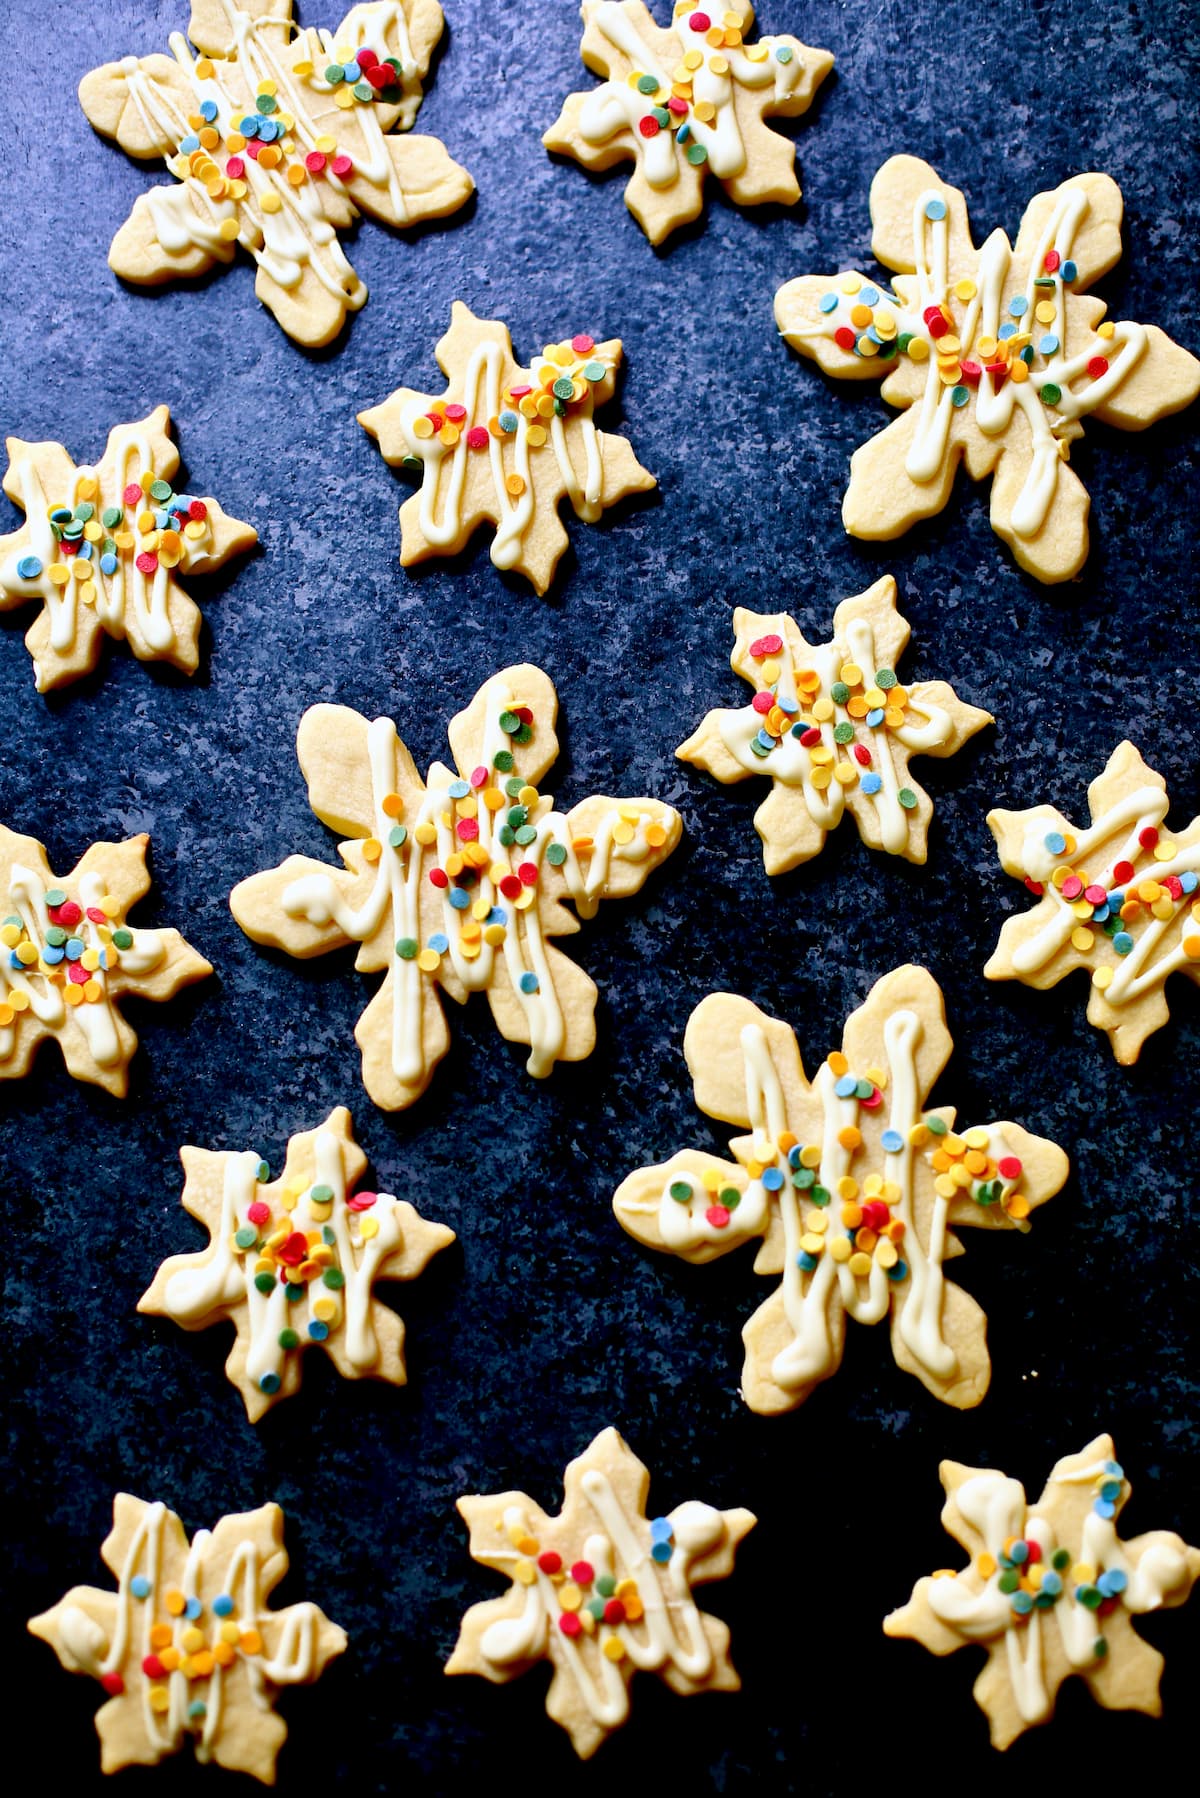 cookies shaped like snowflakes with chocolate drizzle and sprinkles.